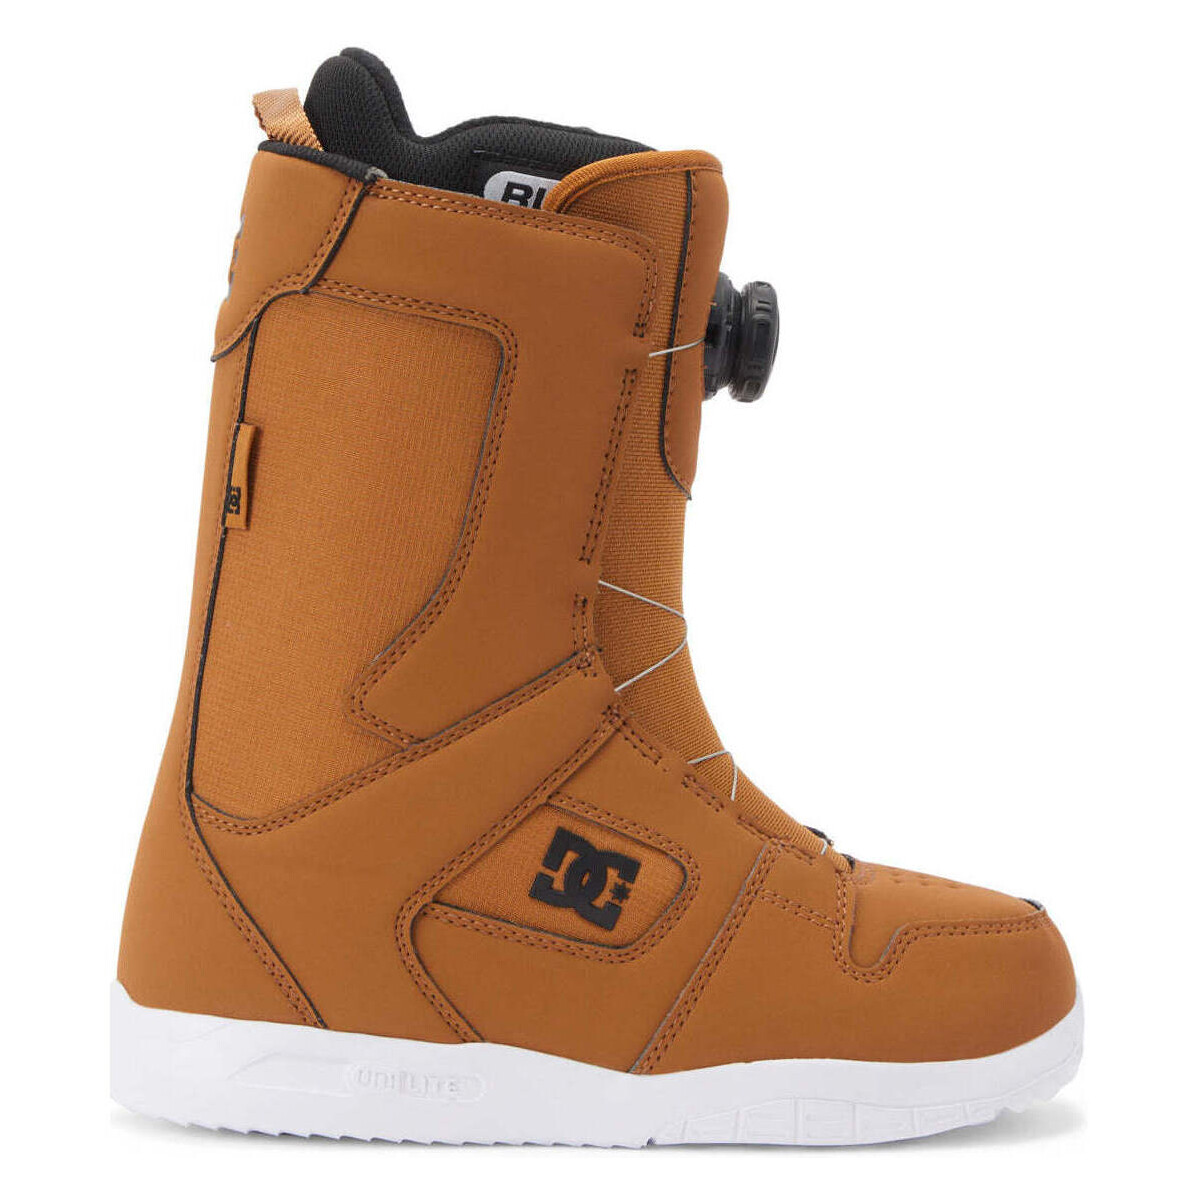 Chaussures Femme Multisport DC Shoes Botas Snowboard  Mujer Phase BOA - Wheat/White Marron